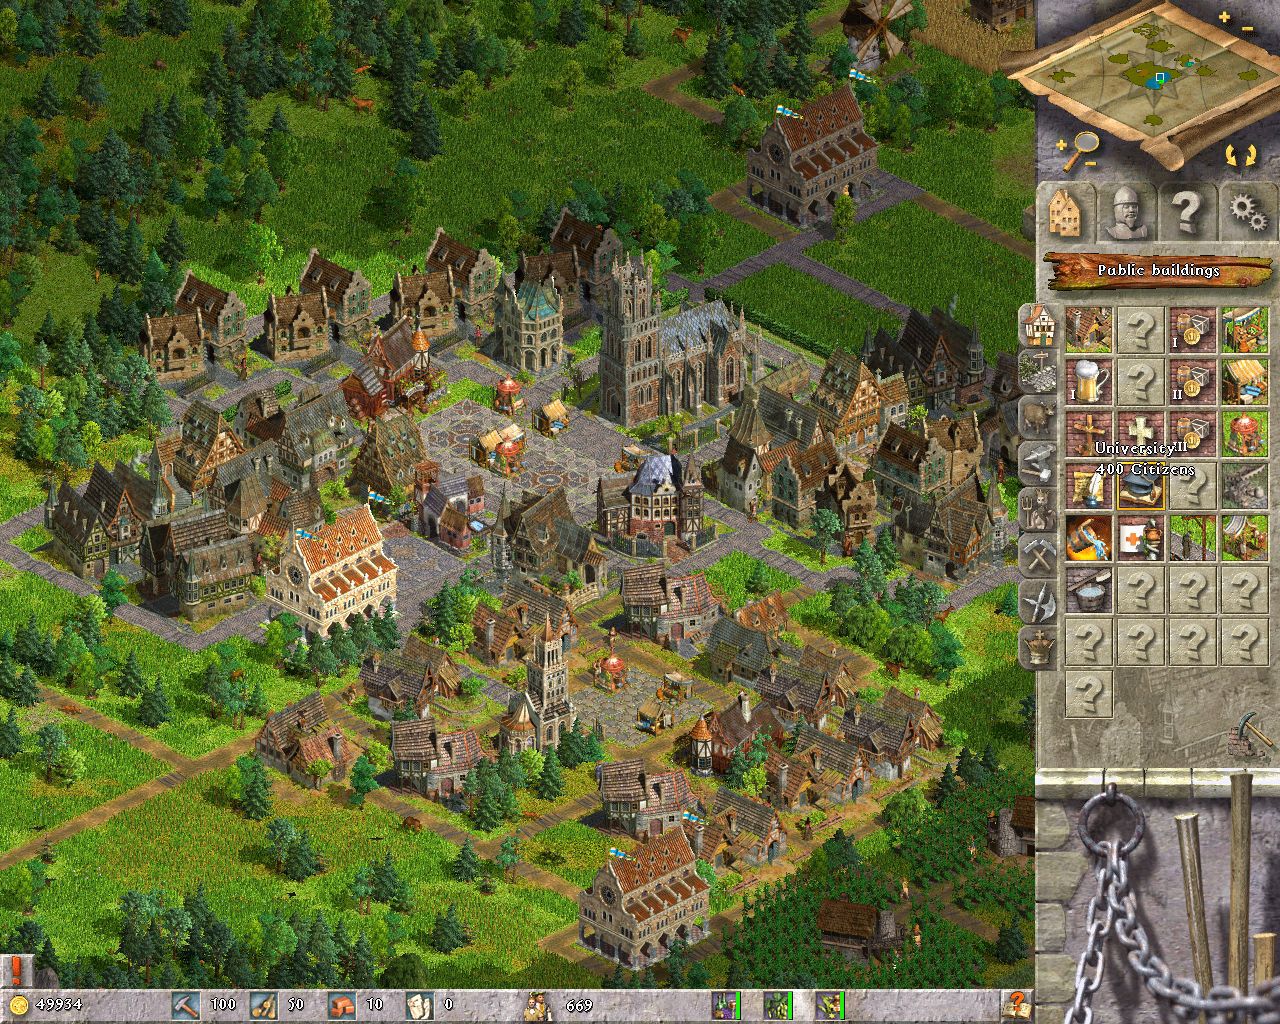 anno 1503 add ons